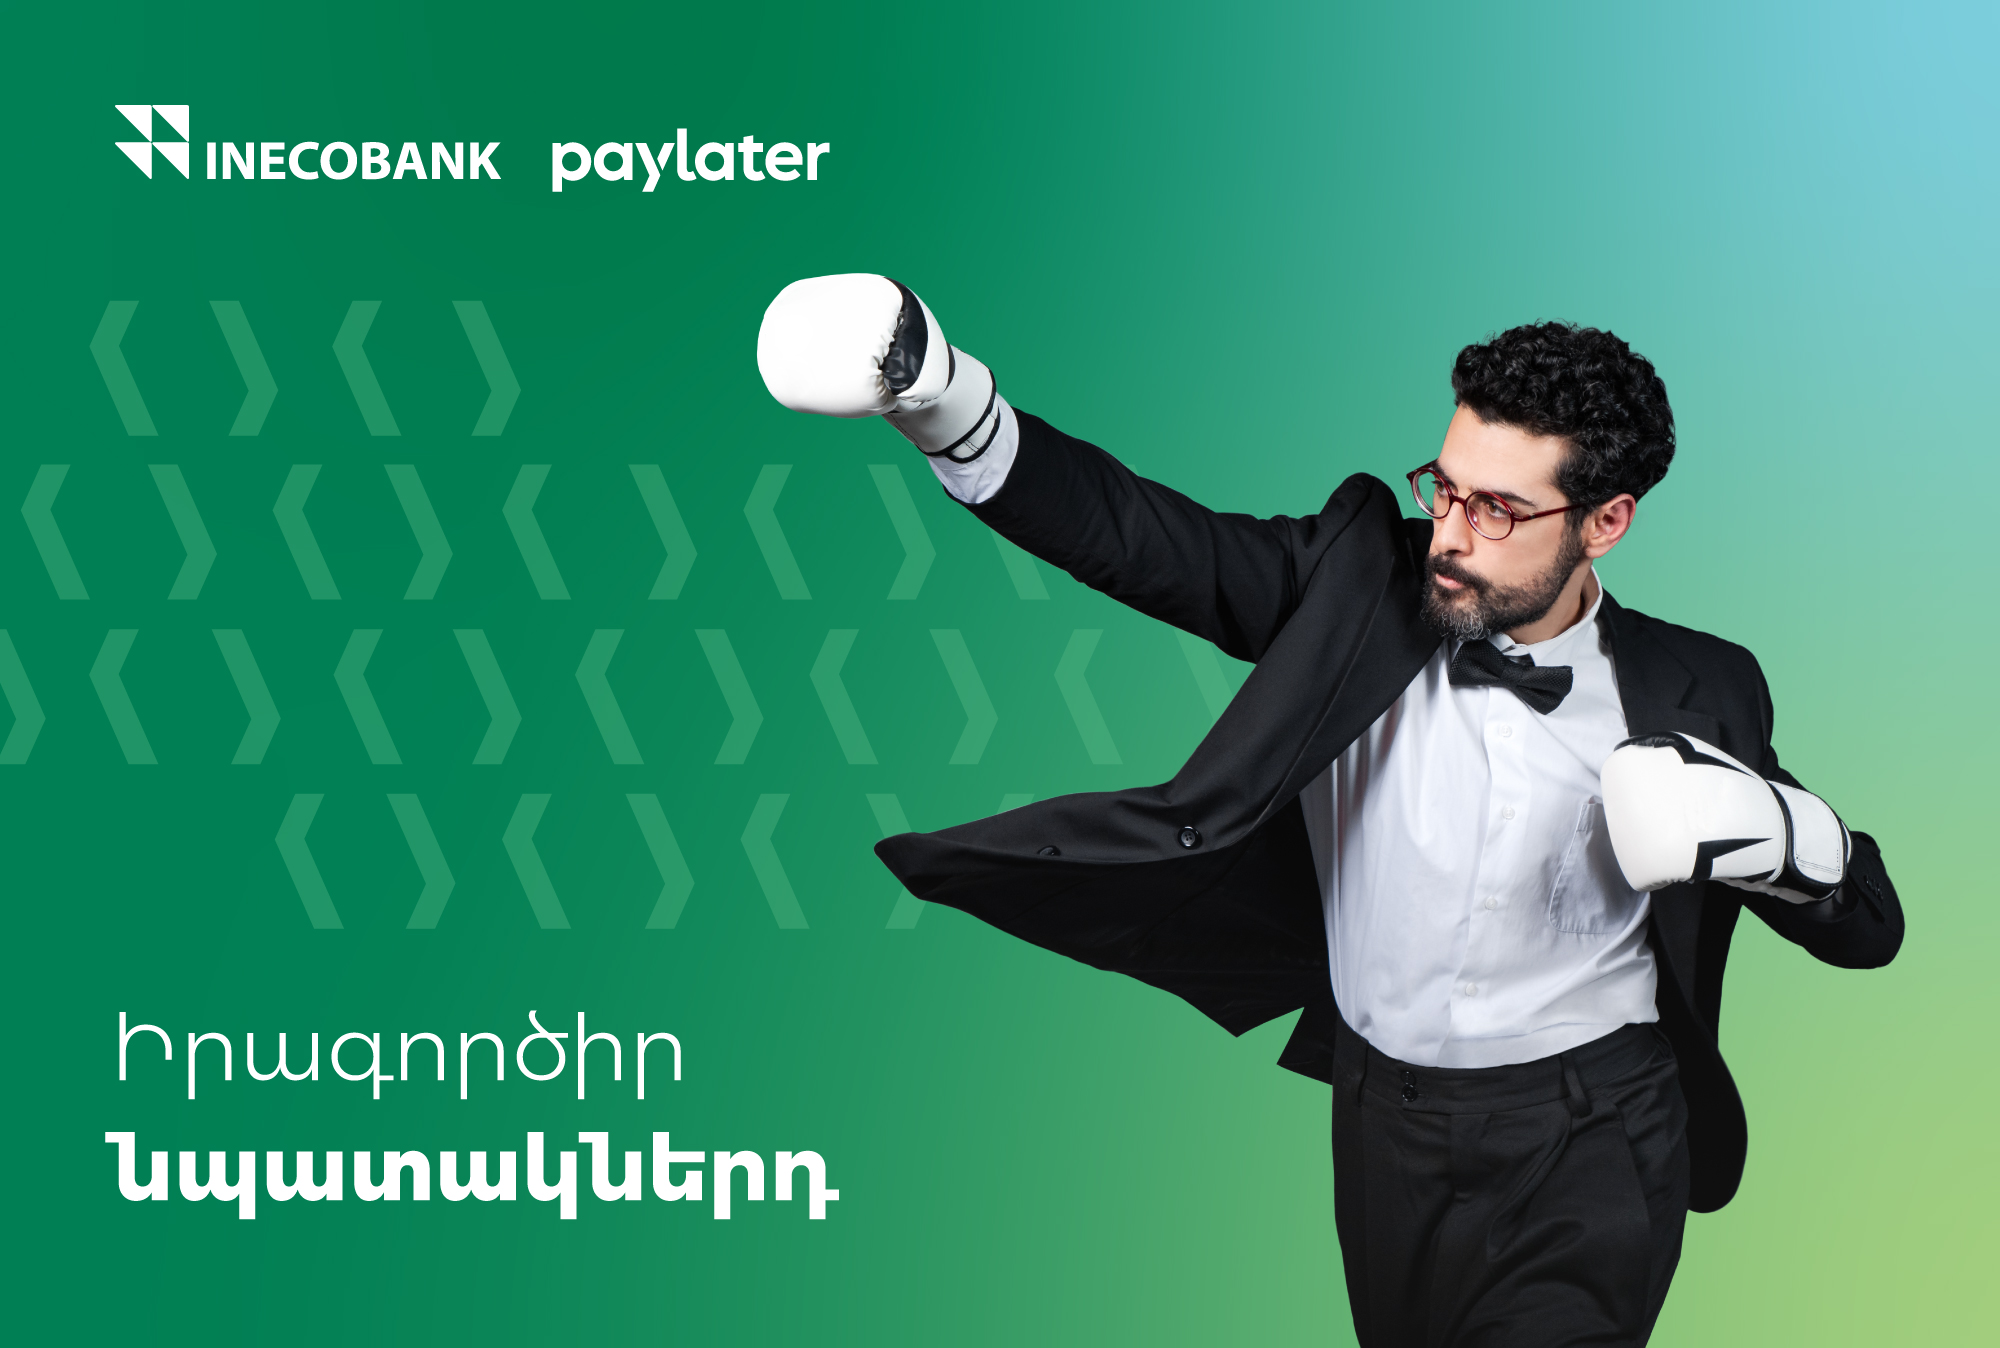 MARKETING CAMPAIGN FOR INECOBANK